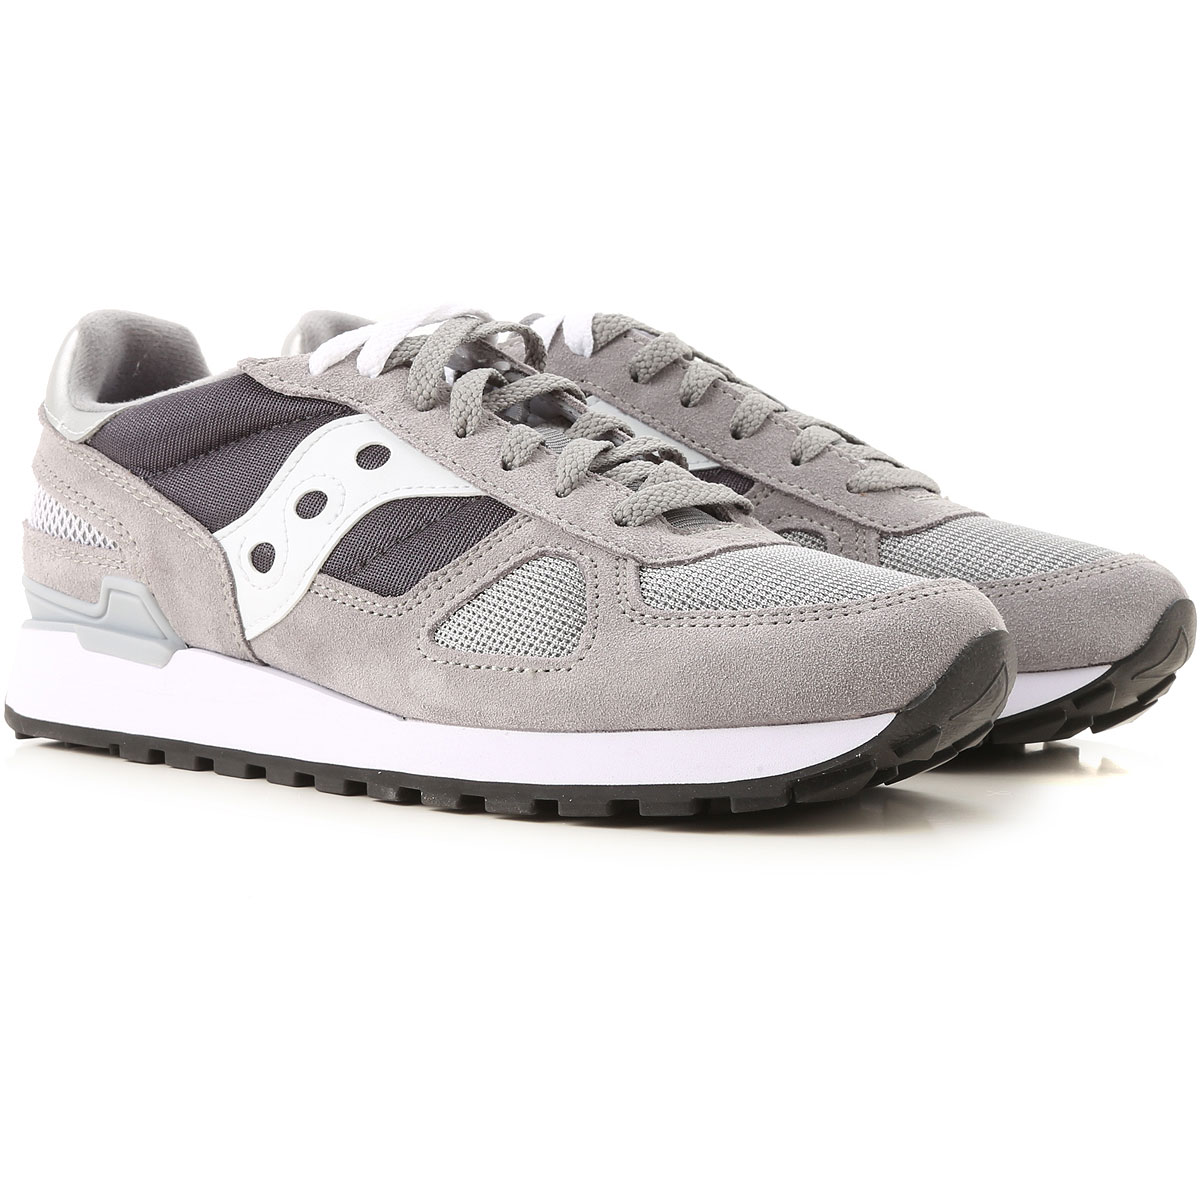 Mens Shoes Saucony, Style code: s2108-702-